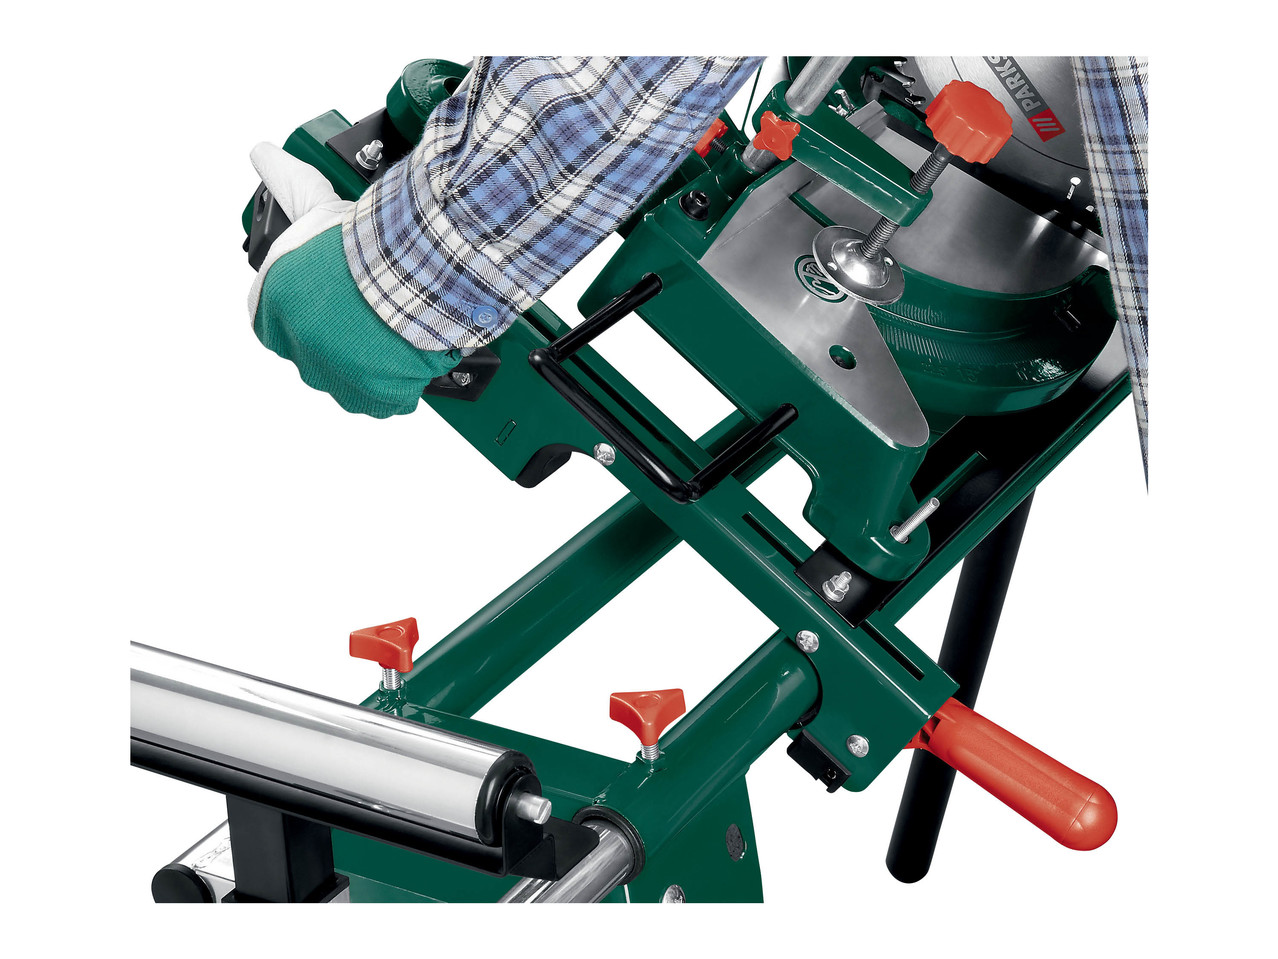 PARKSIDE Universal Tool Stand